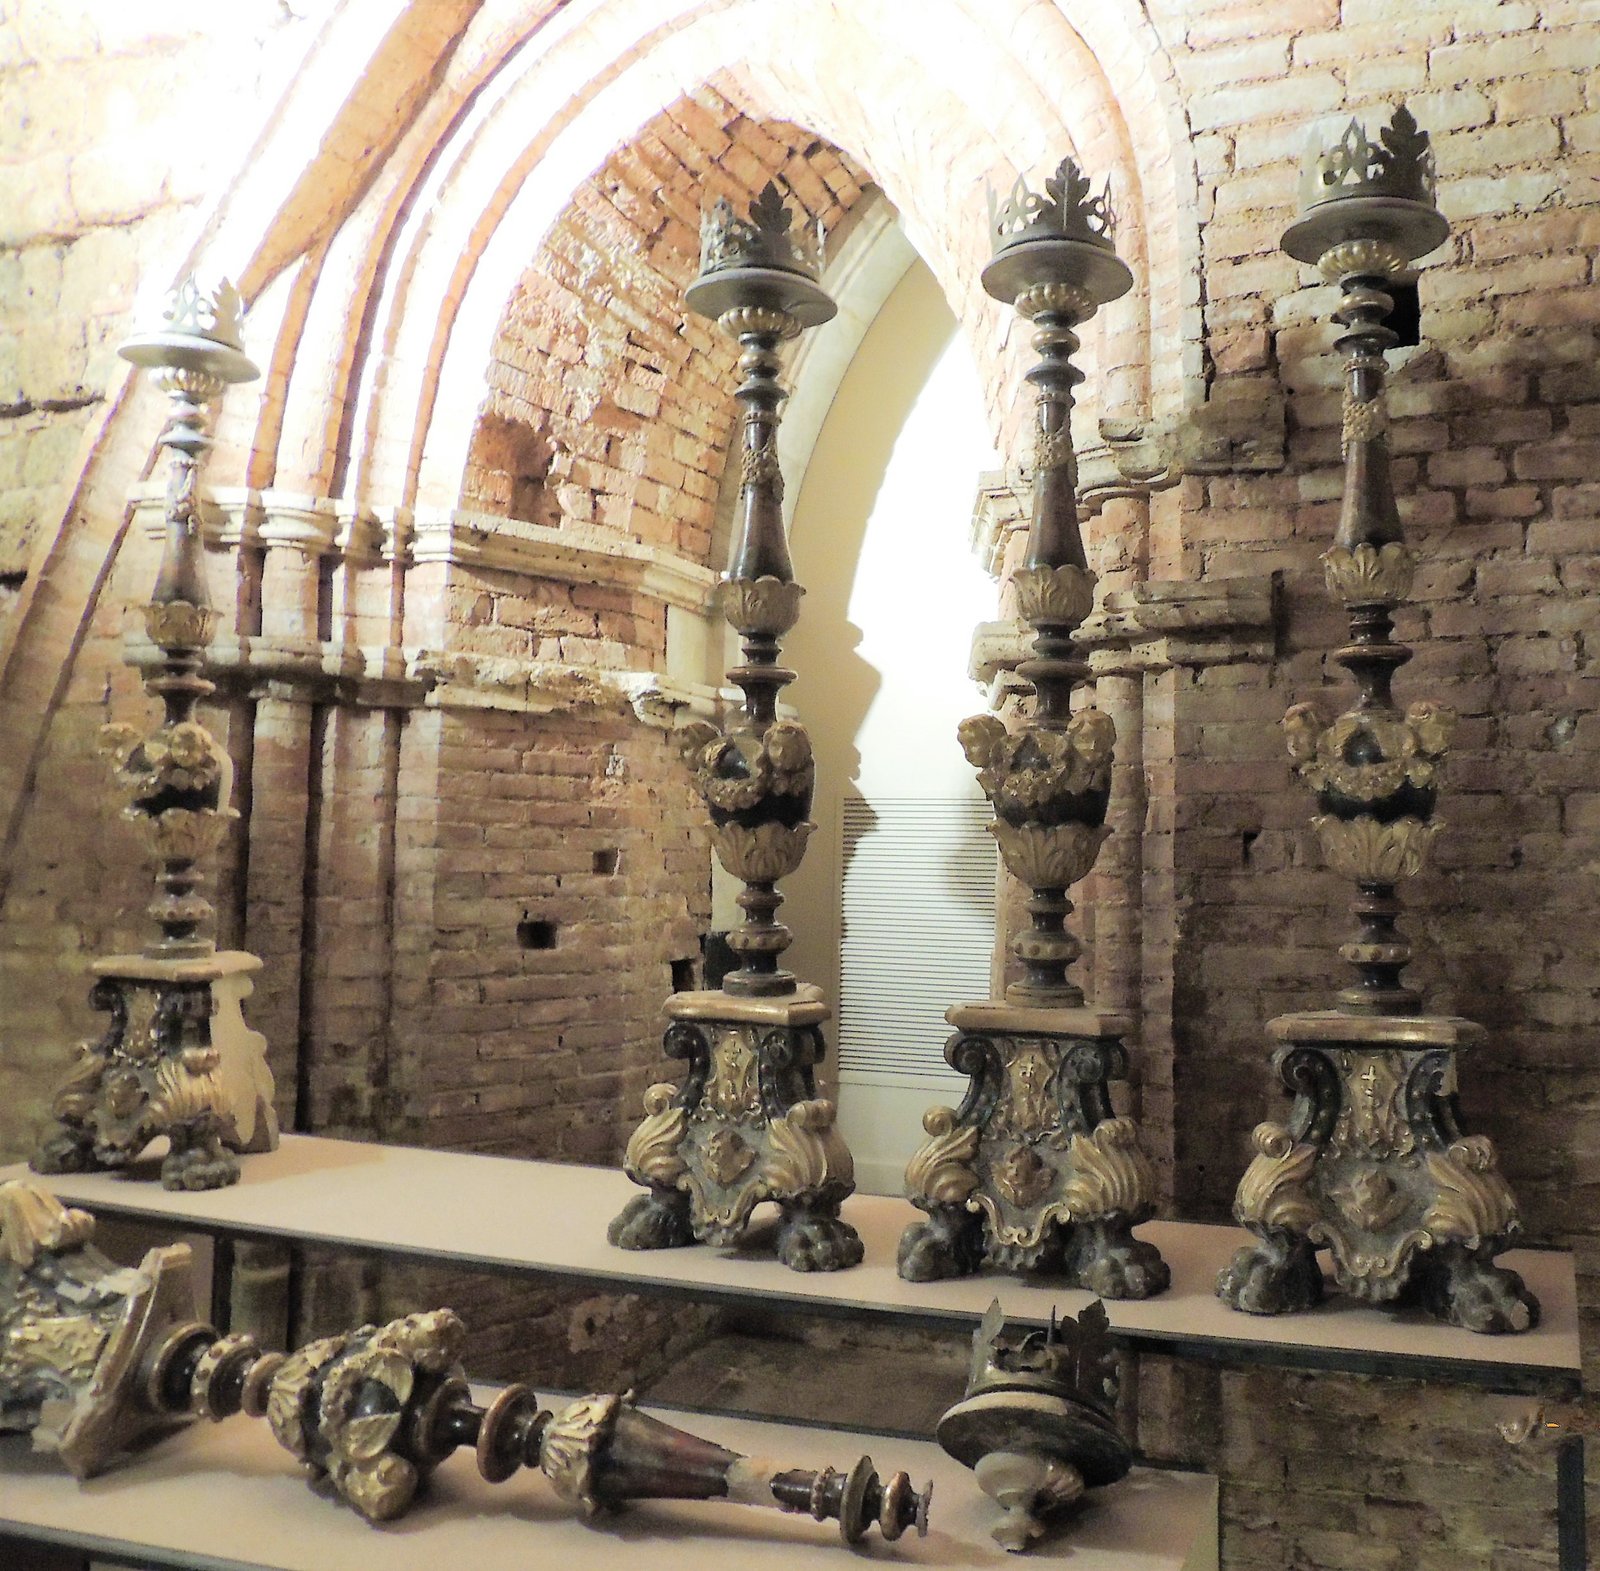 the incredible large candlesticks from Norcia - ouritalianjourney.com